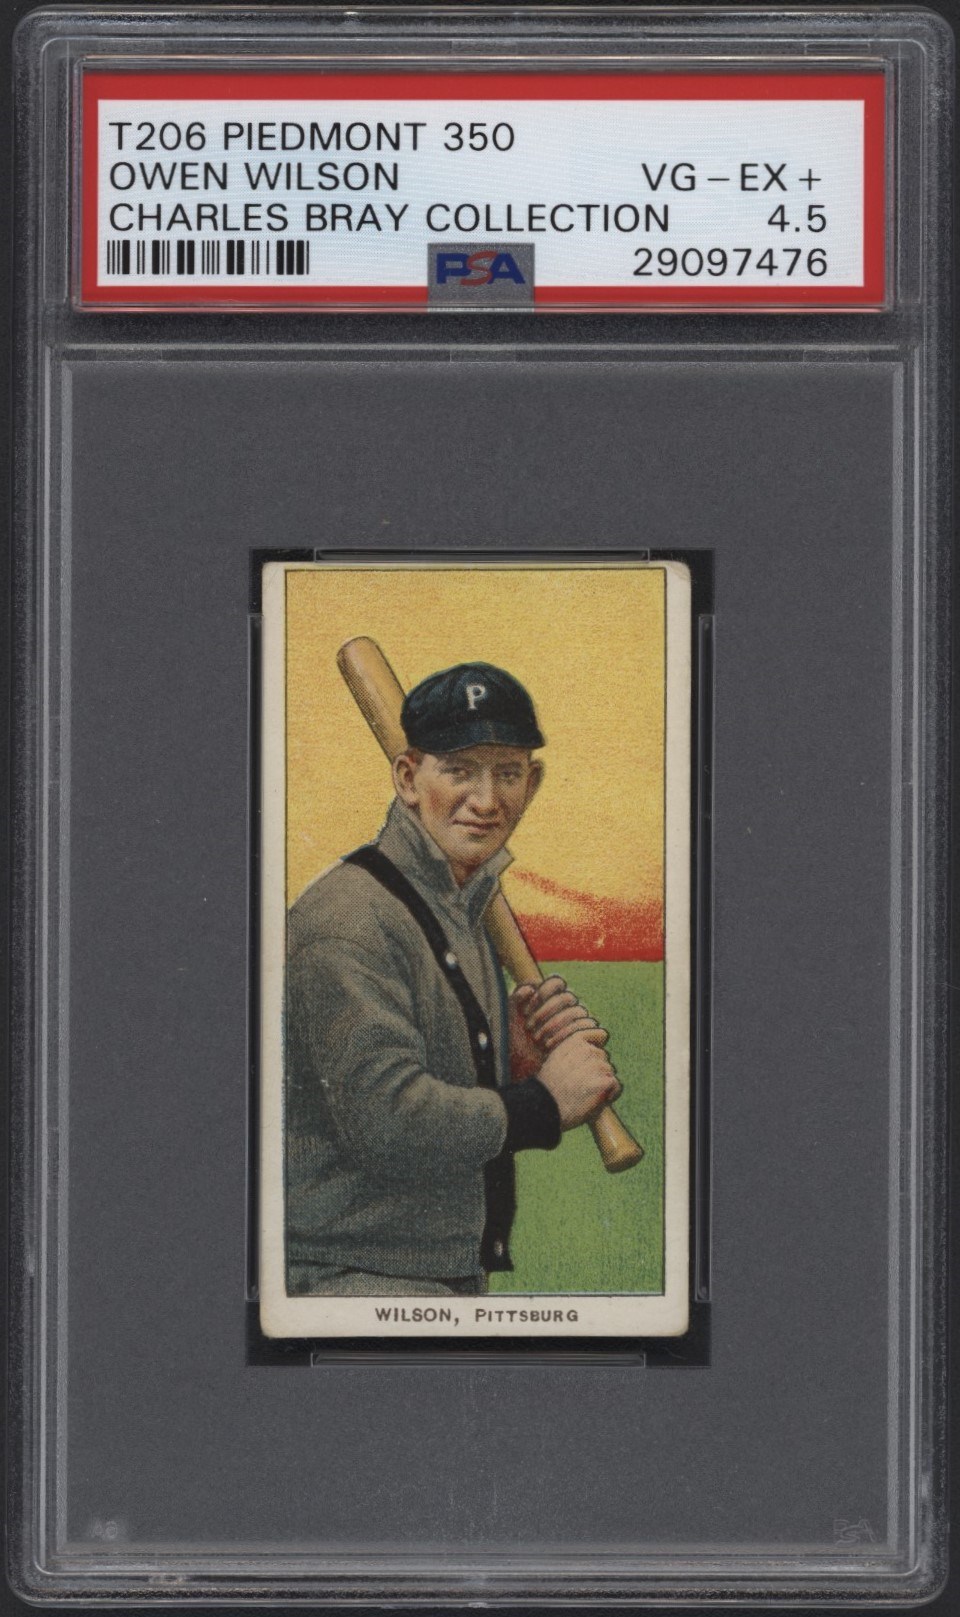 Baseball and Trading Cards - T206 Piedmont 350 Owen Wilson PSA 4.5 From the Charles Bray Collection